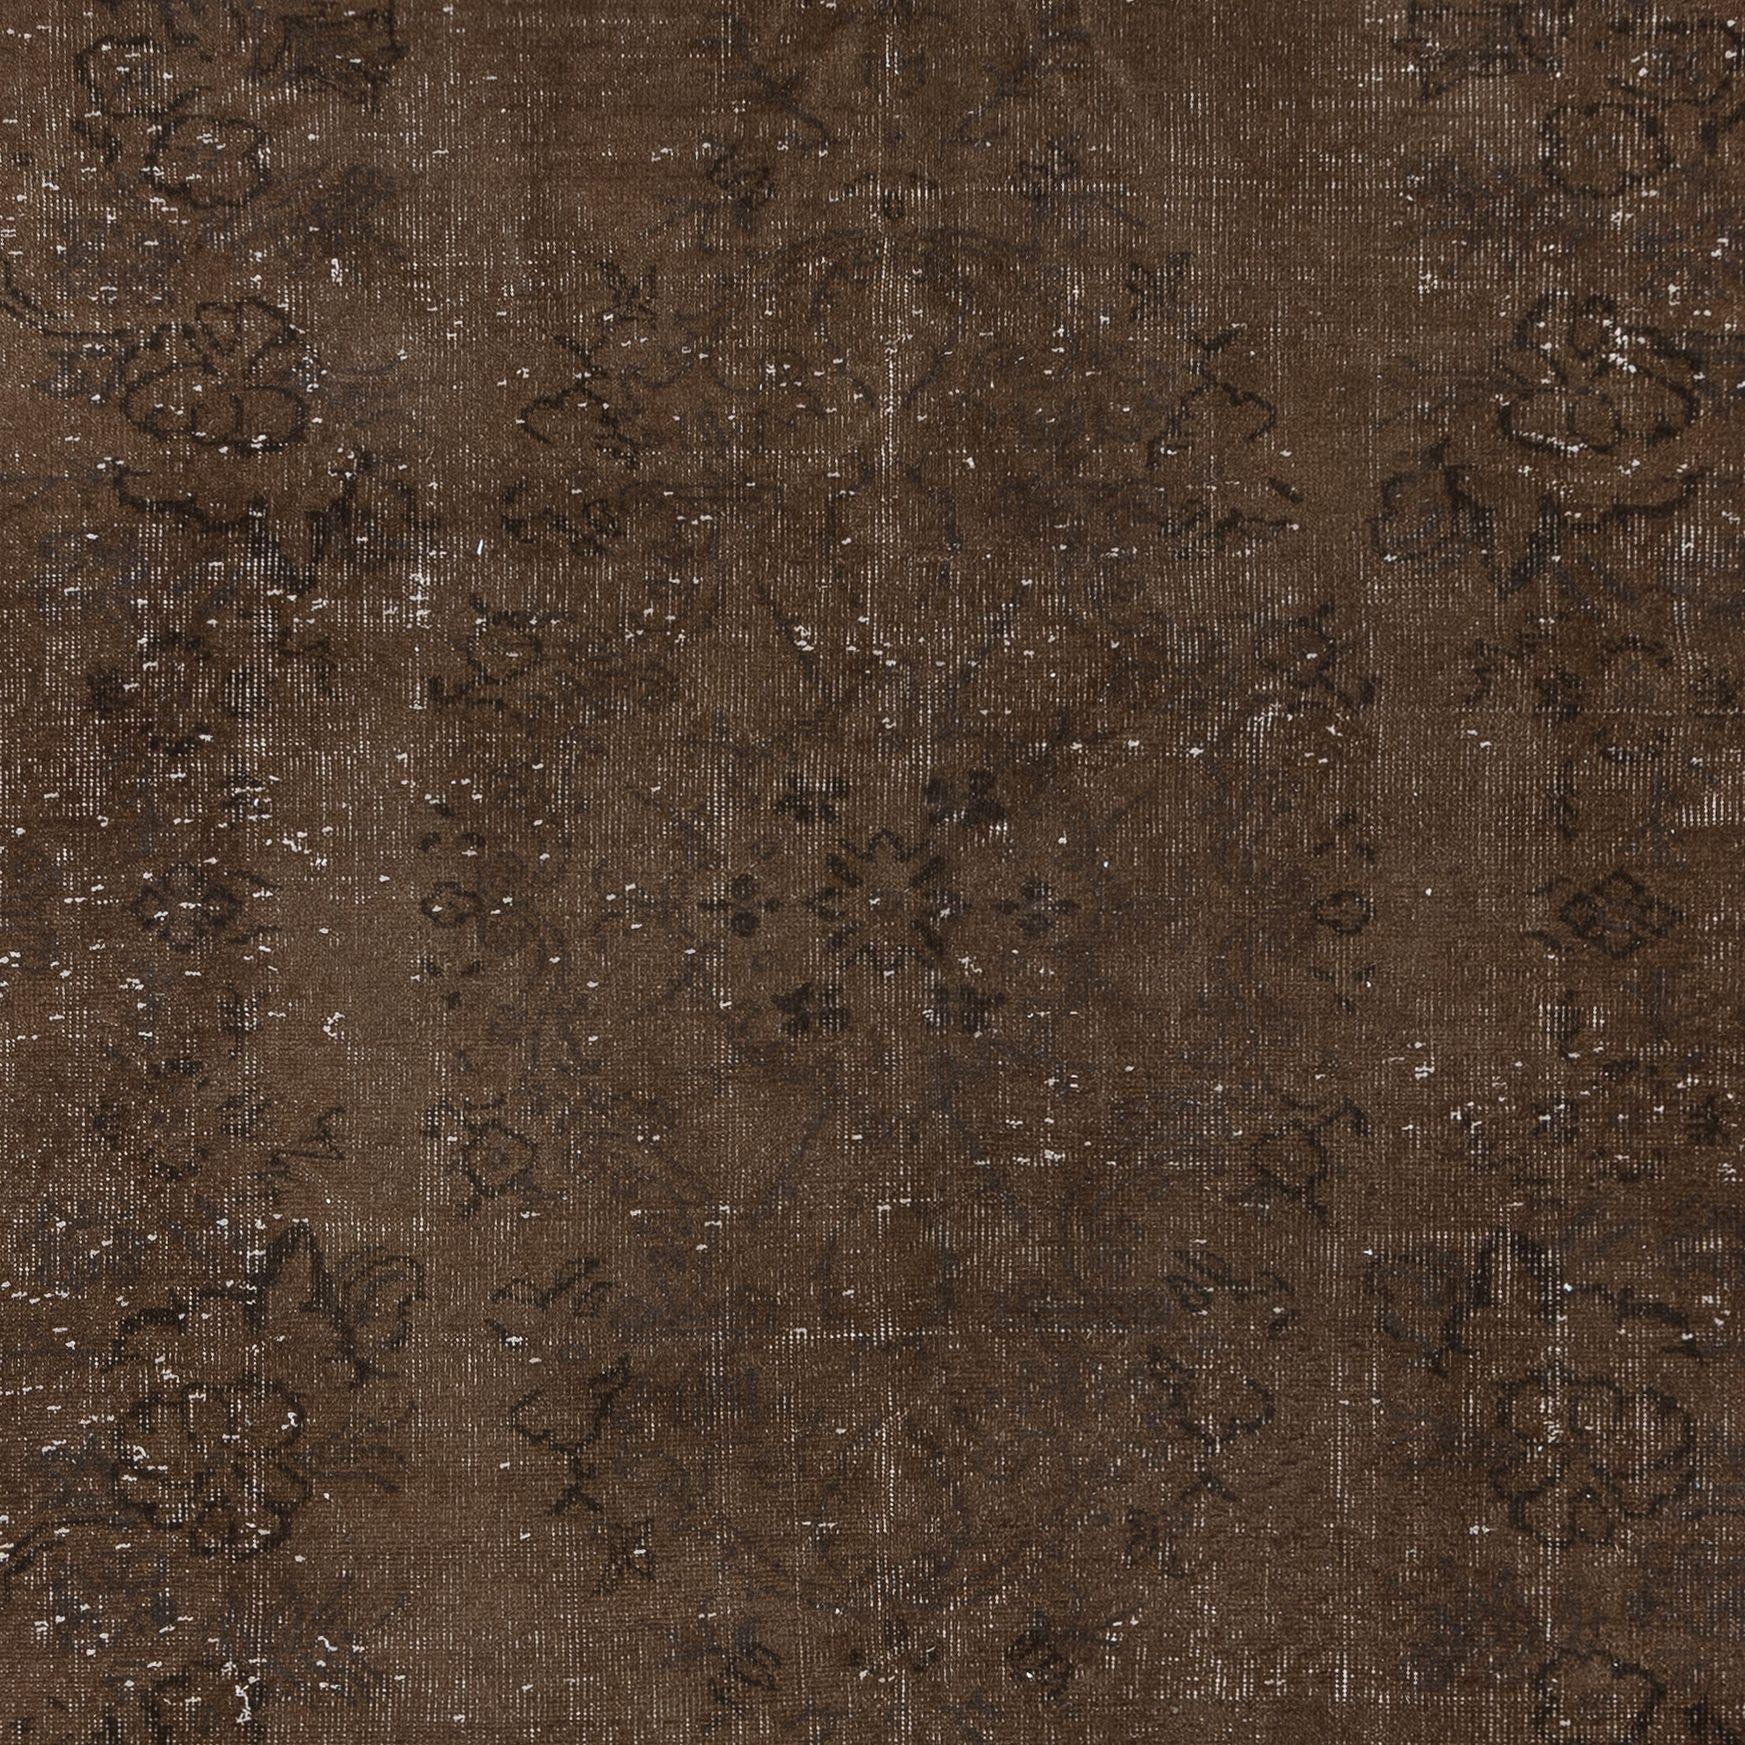 Hand-Woven 6.2x7.8 Ft Distressed Vintage Handmade Turkish Rug, Decorative Brown Wool Carpet For Sale